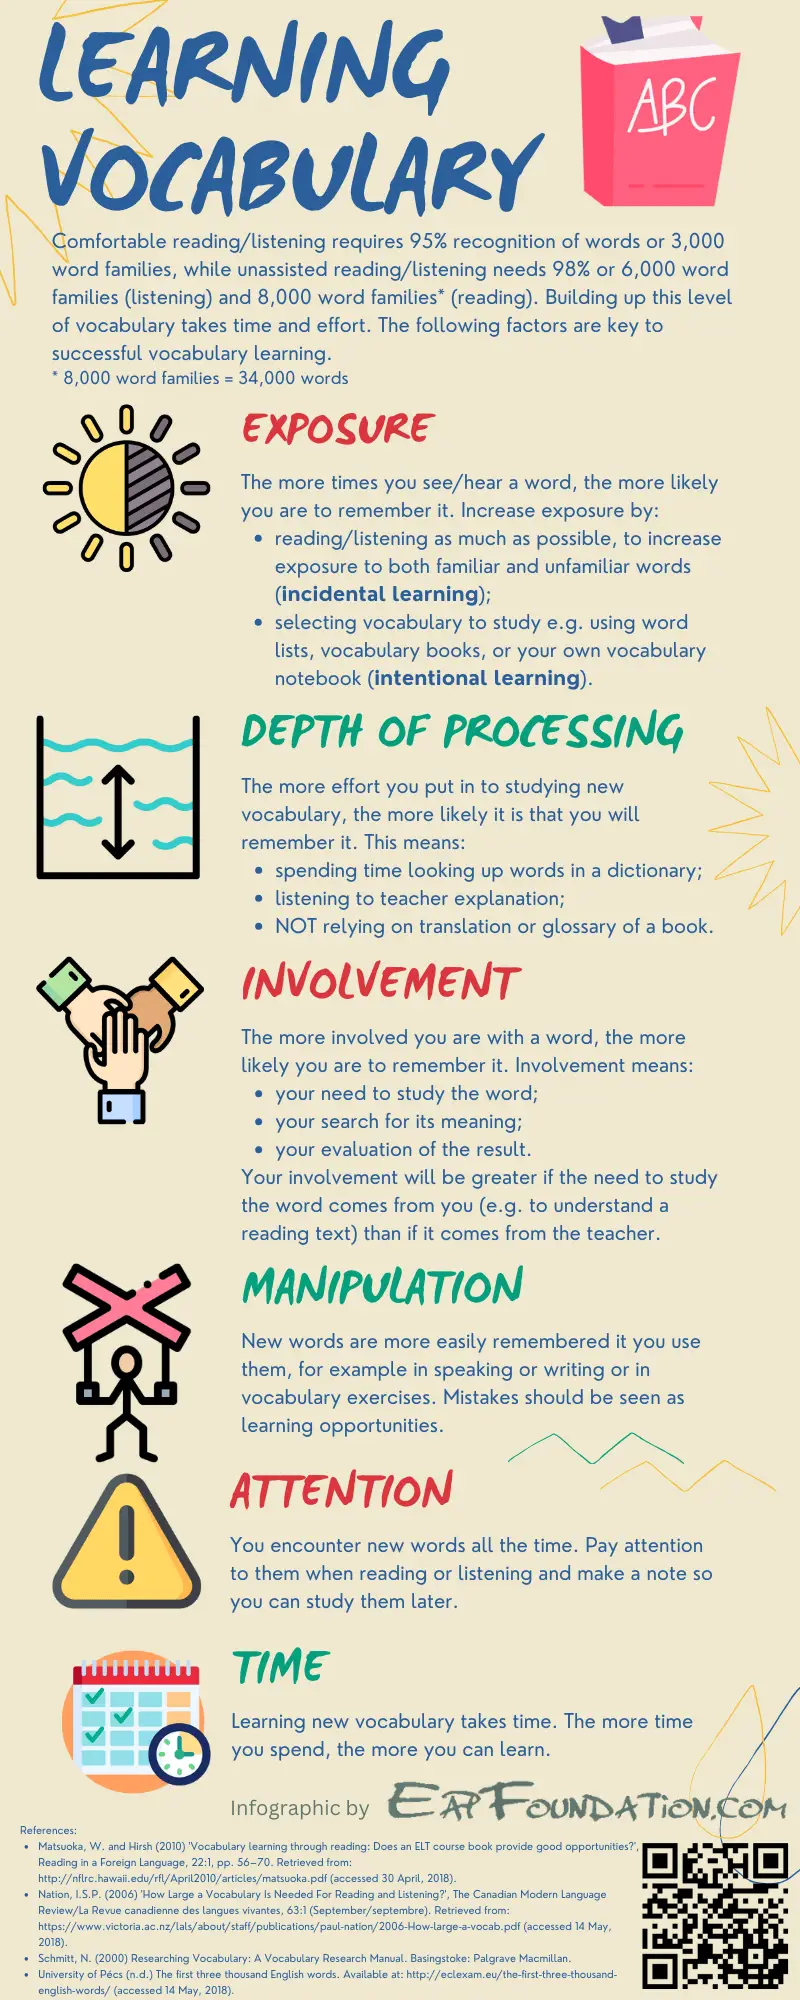 learn vocab infographic